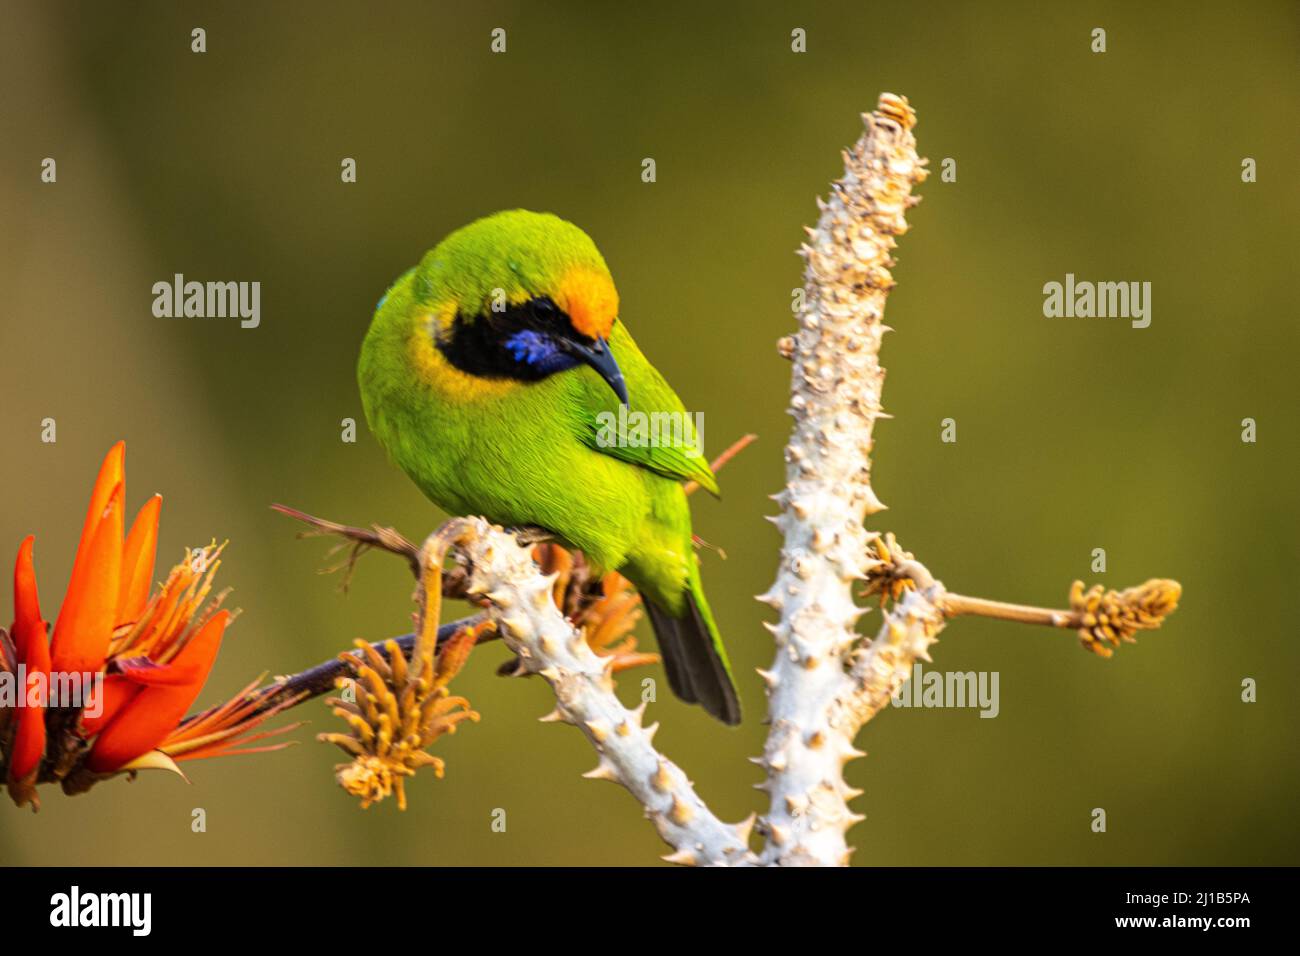 A closeup shot of a cute greater green leafbird (Chloropsis sonnerati) bird perched on a branch Stock Photo